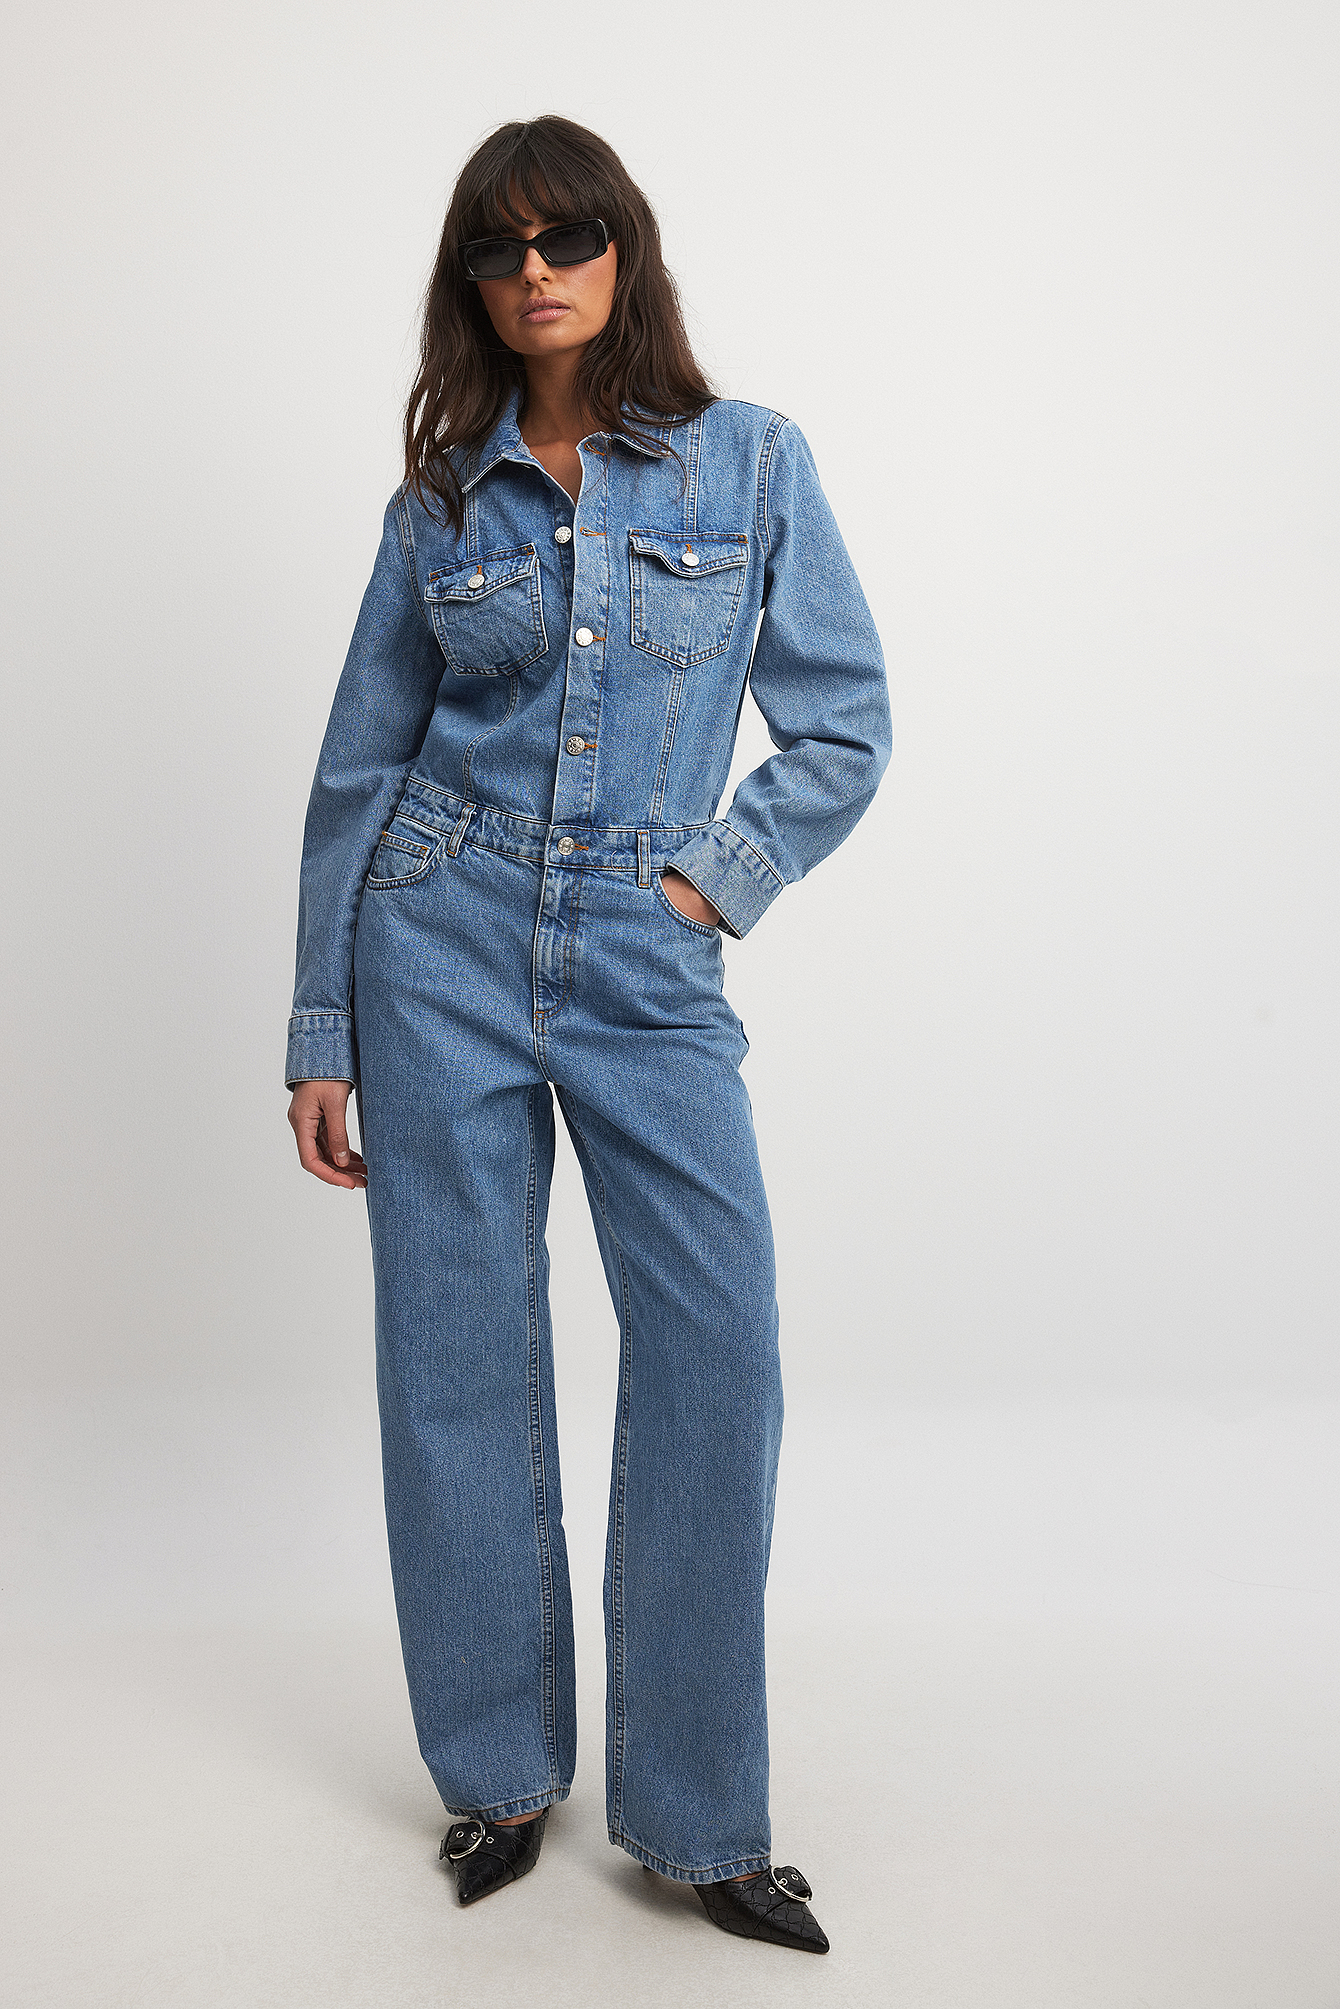 Tree Patterns Vintage Jean Overalls Loose Denim One Piece Pants in As The  Photo One Size | Denim fashion, Vintage jeans, Fashion clothes women